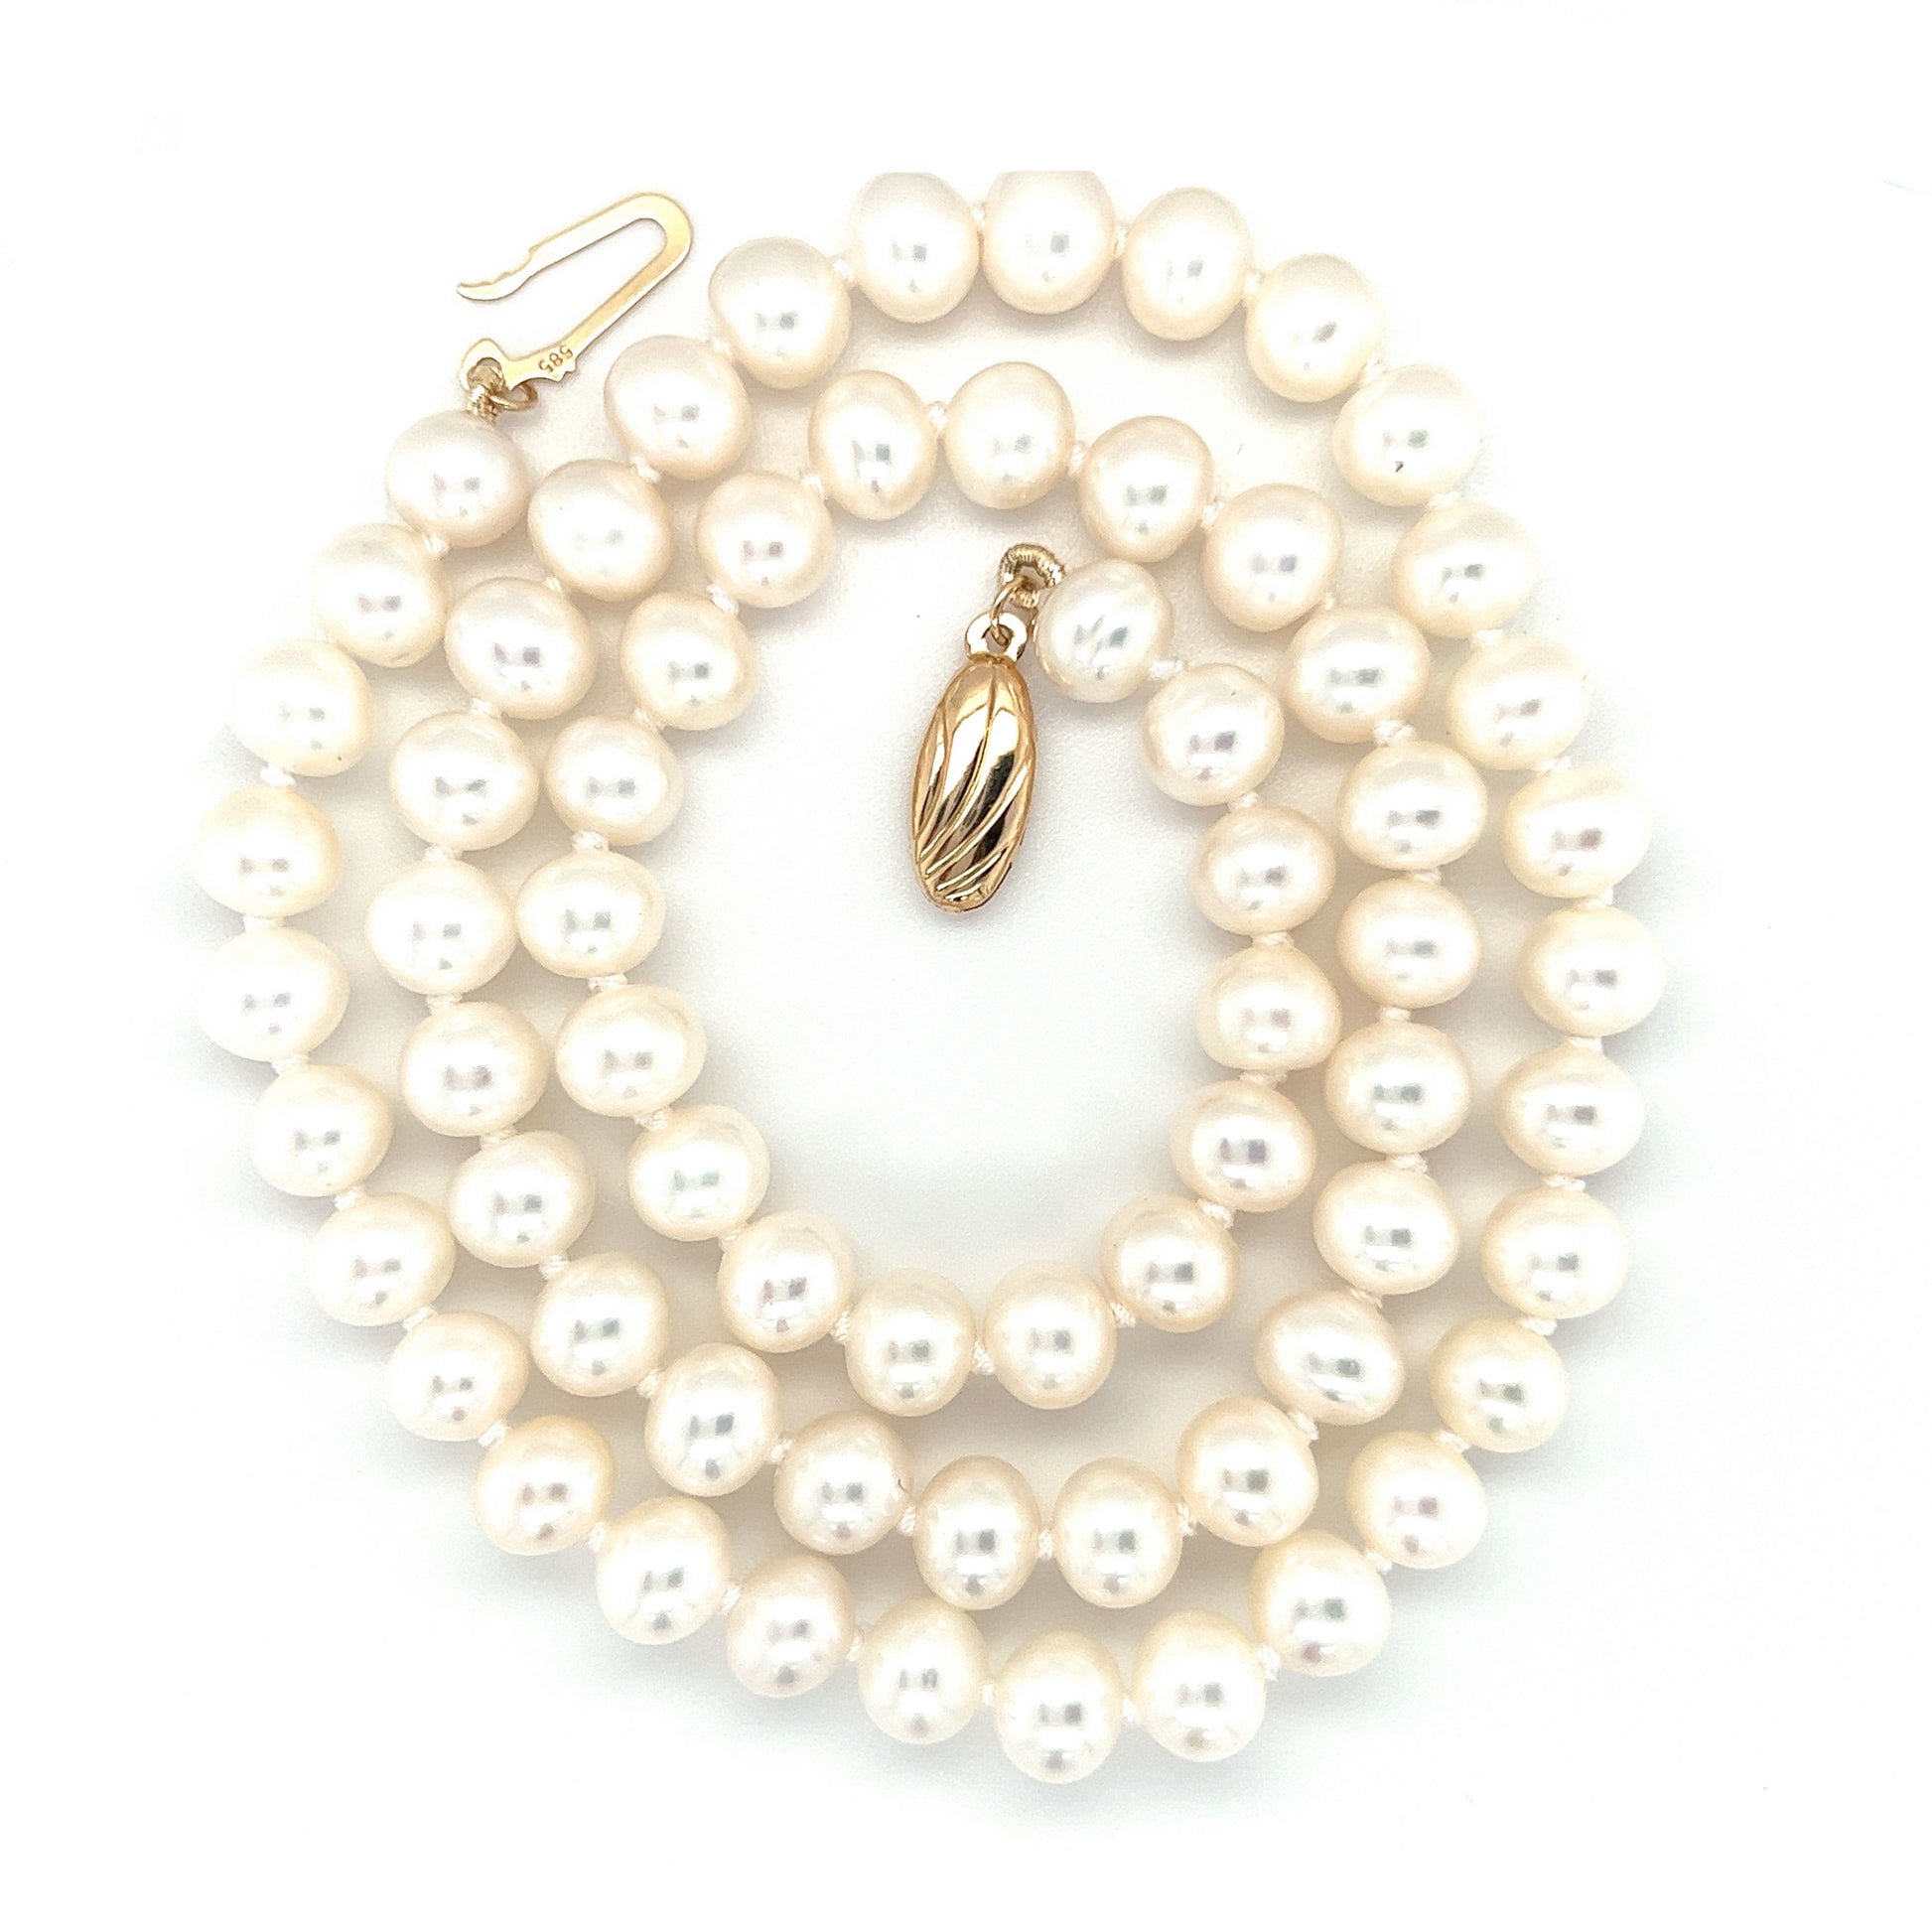 Cultured Freshwater Pearl Necklace with 14K Yellow Gold Clasp Full Necklace Top View